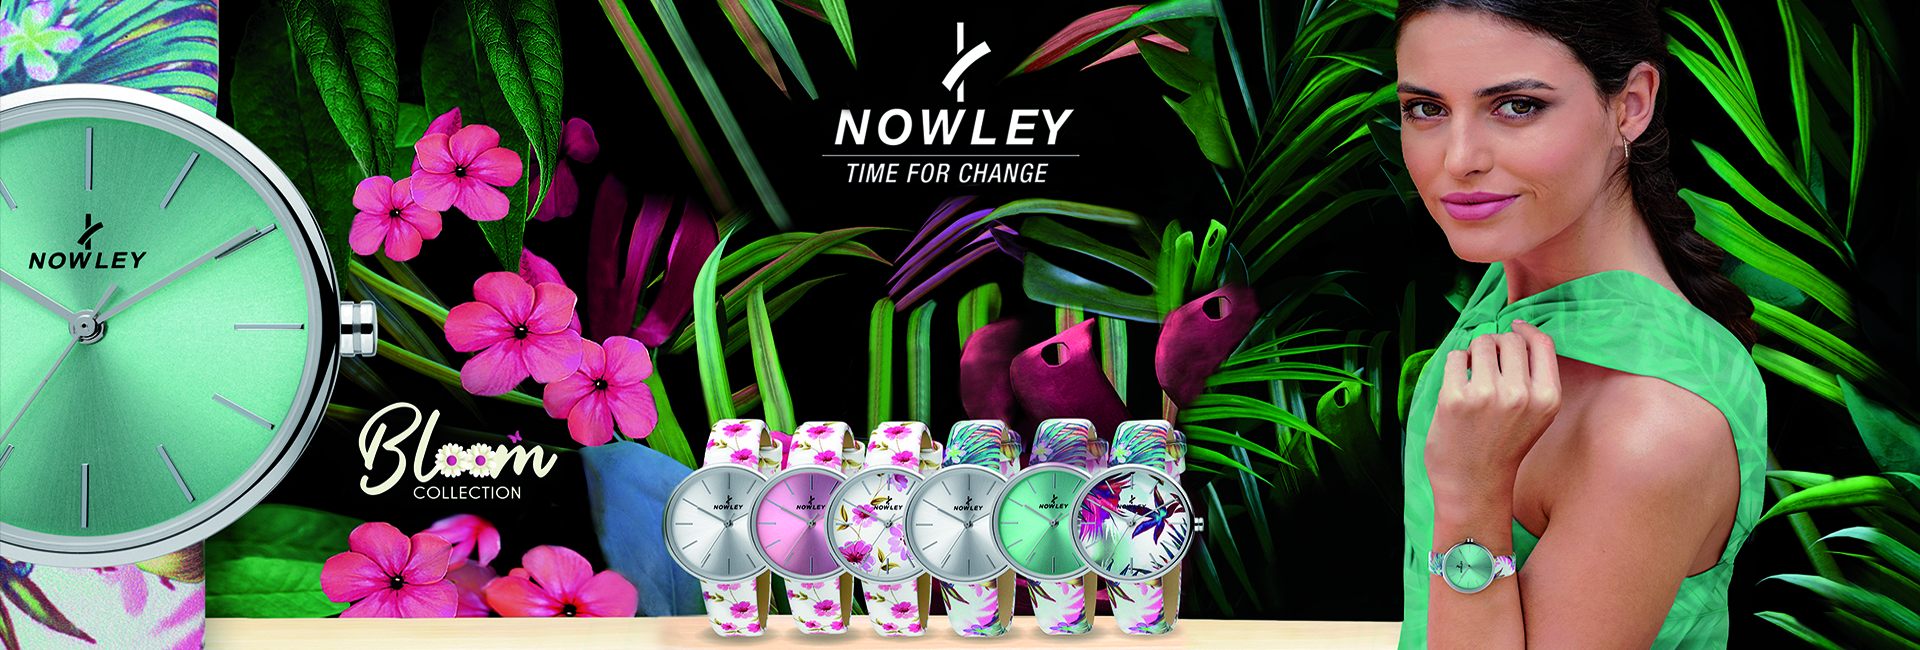 NOWLEY CHIC ‘BLOOM’ COLLECTION